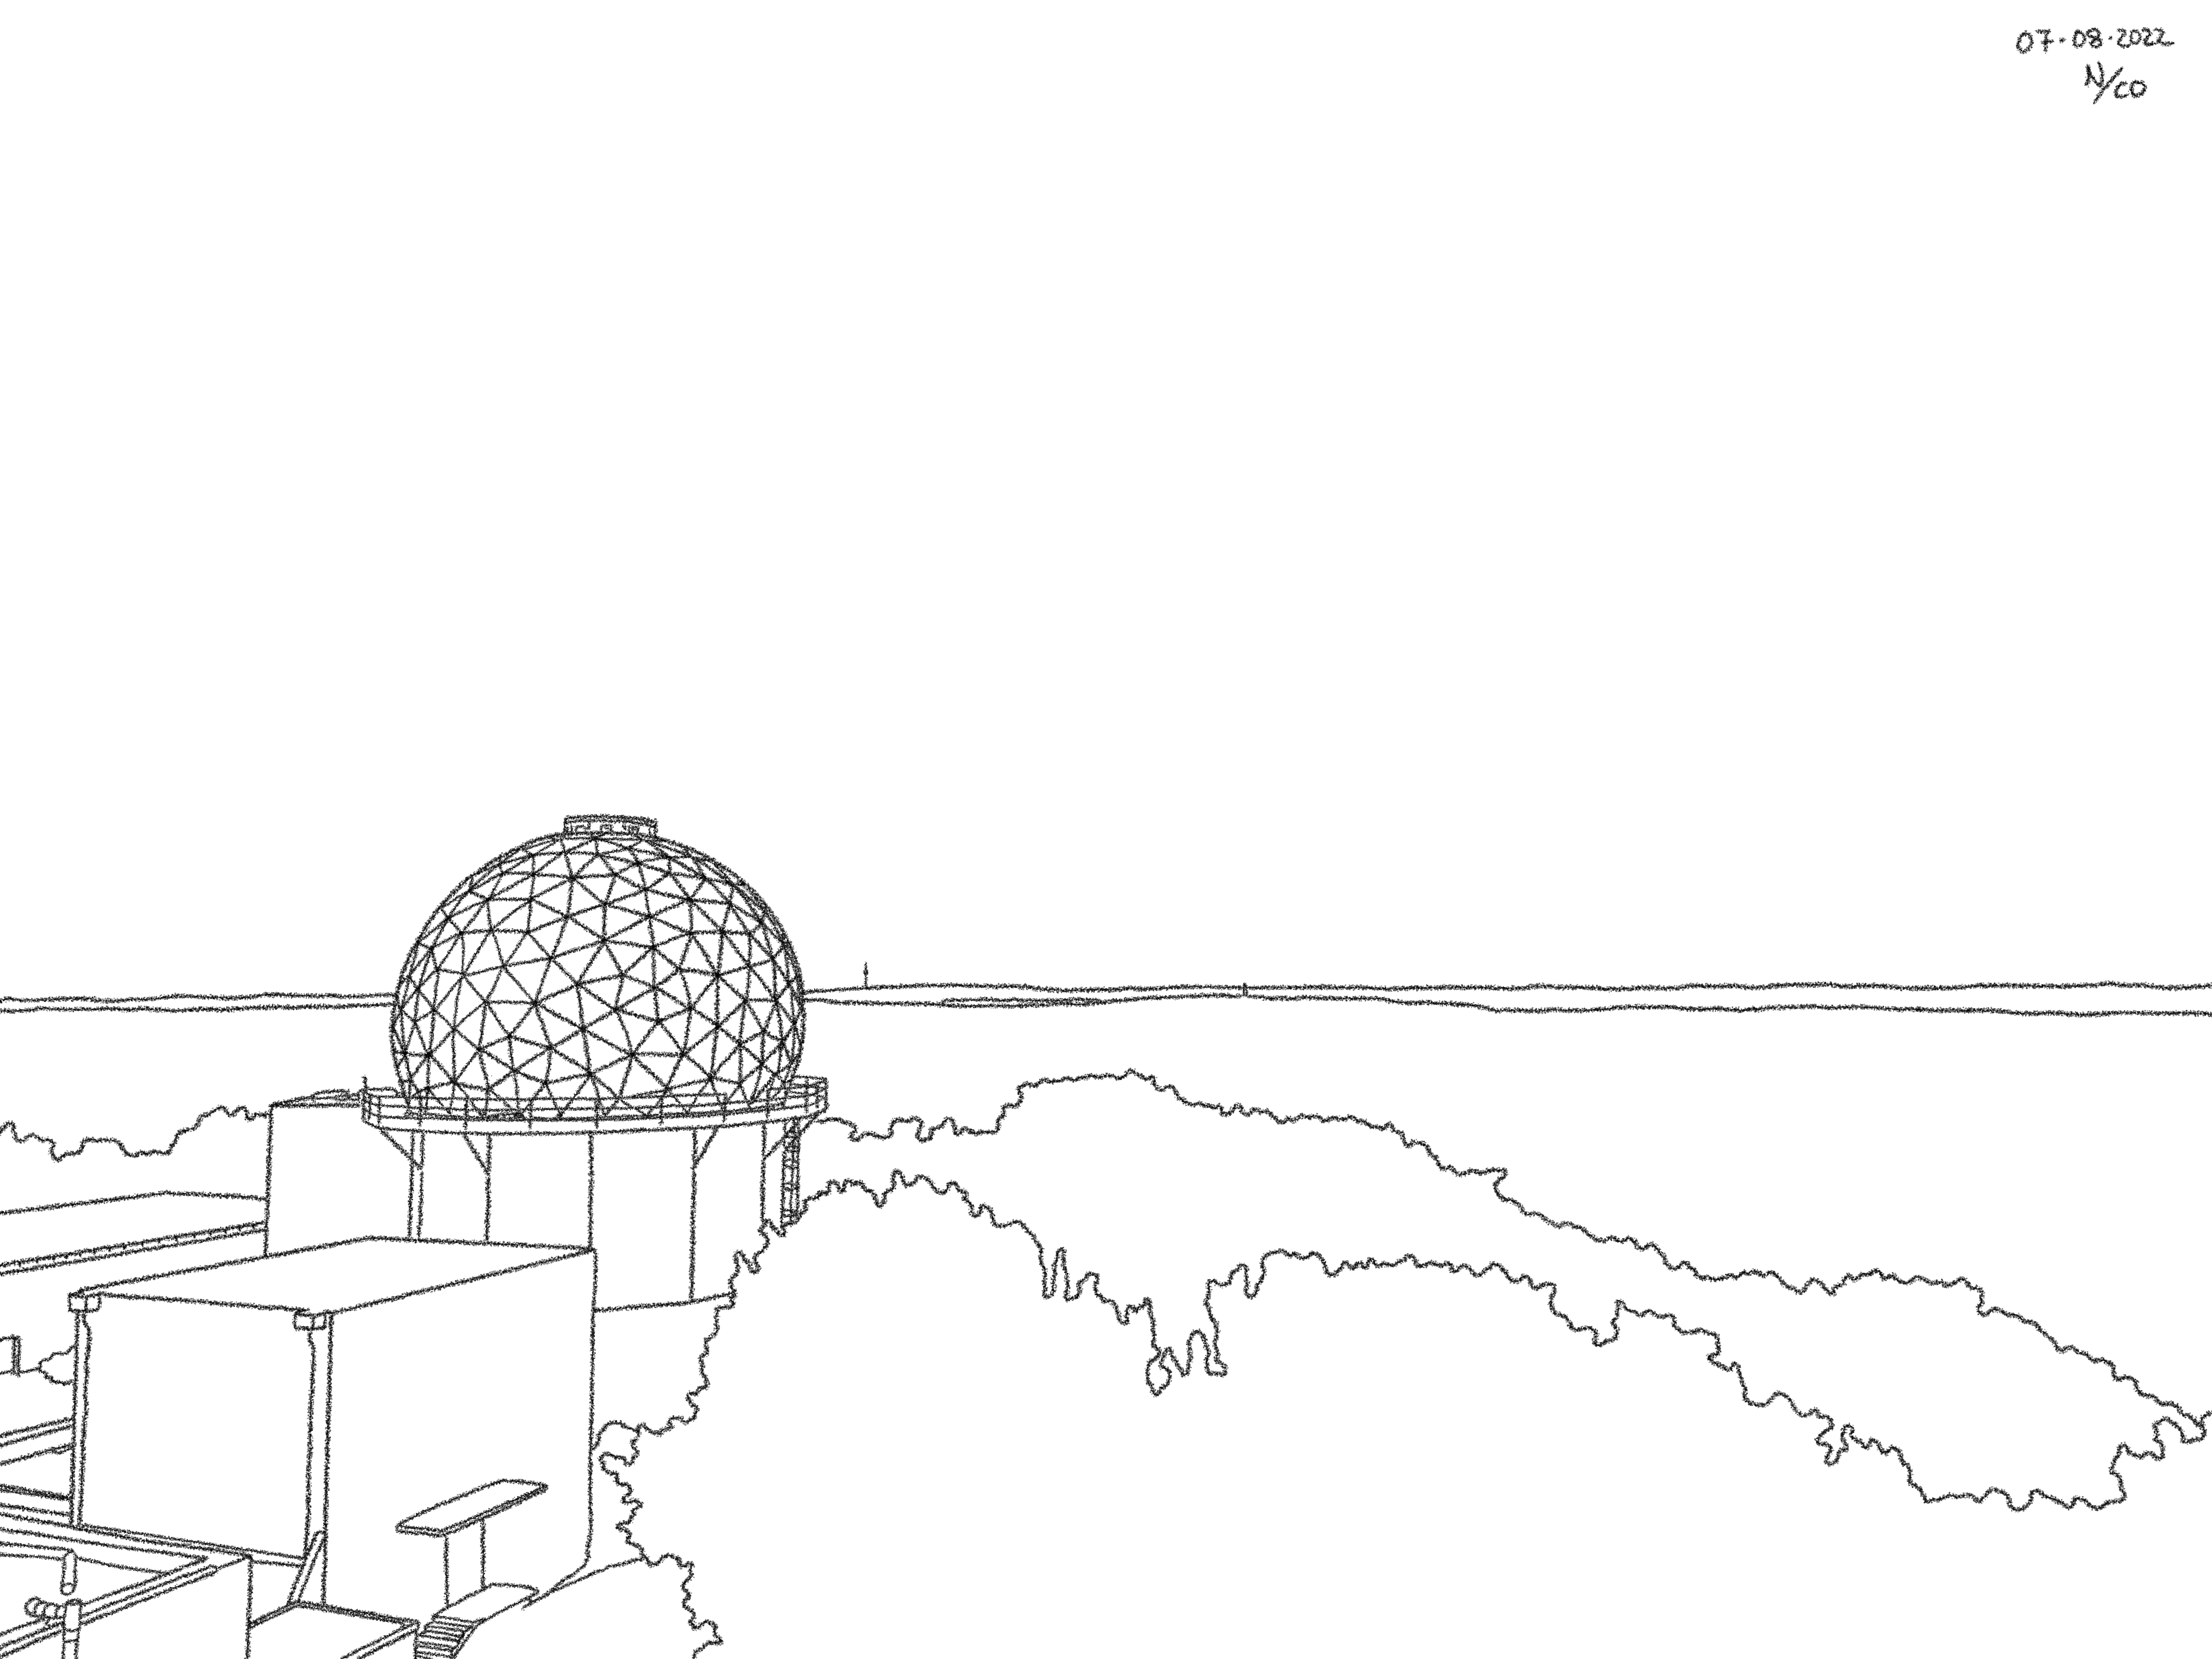 A drawing titled The Listening Station, based on a photo taken at Teufelsberg in Berlin.